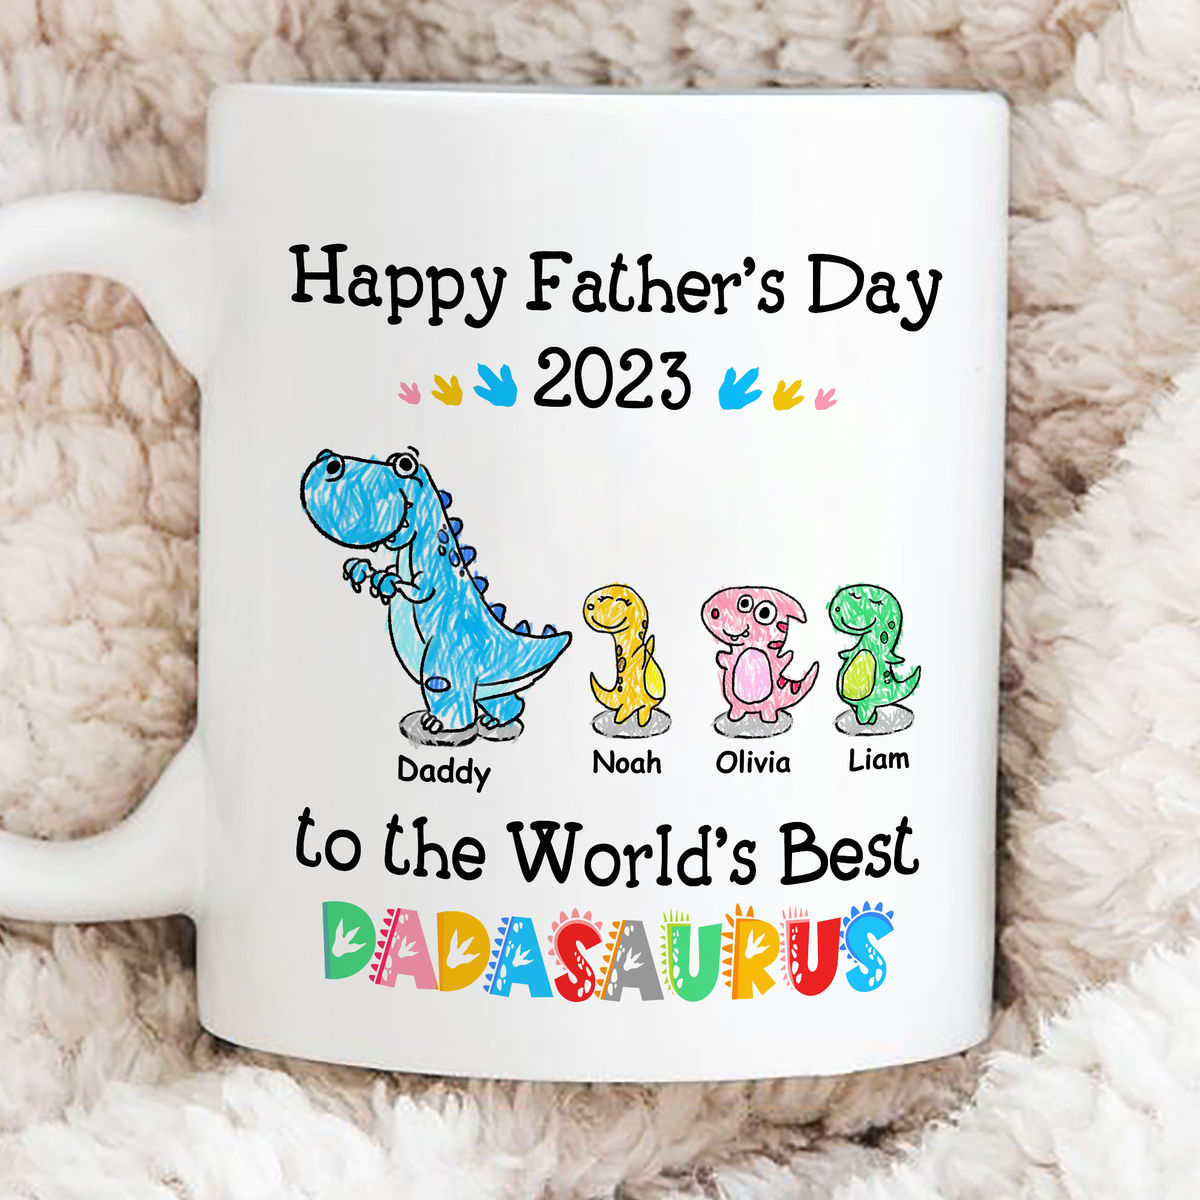 Father's Day Gift - Happy Father's Day to the world's Best